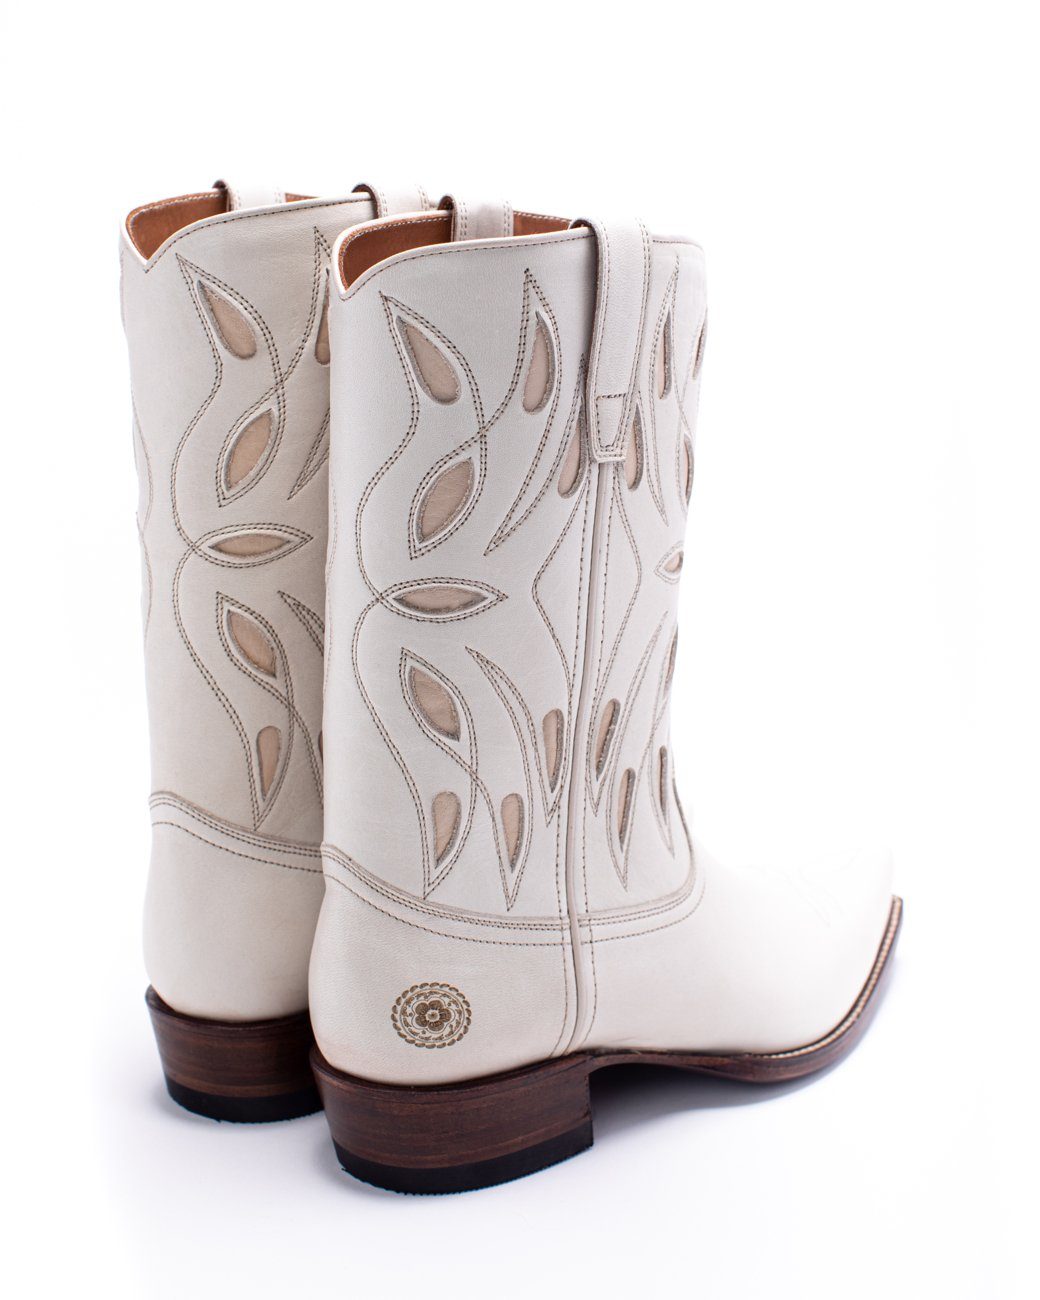 Womens Sagebrush White Leather Cowboy Boot - Ranch Road Boots™ Back Side Stitching